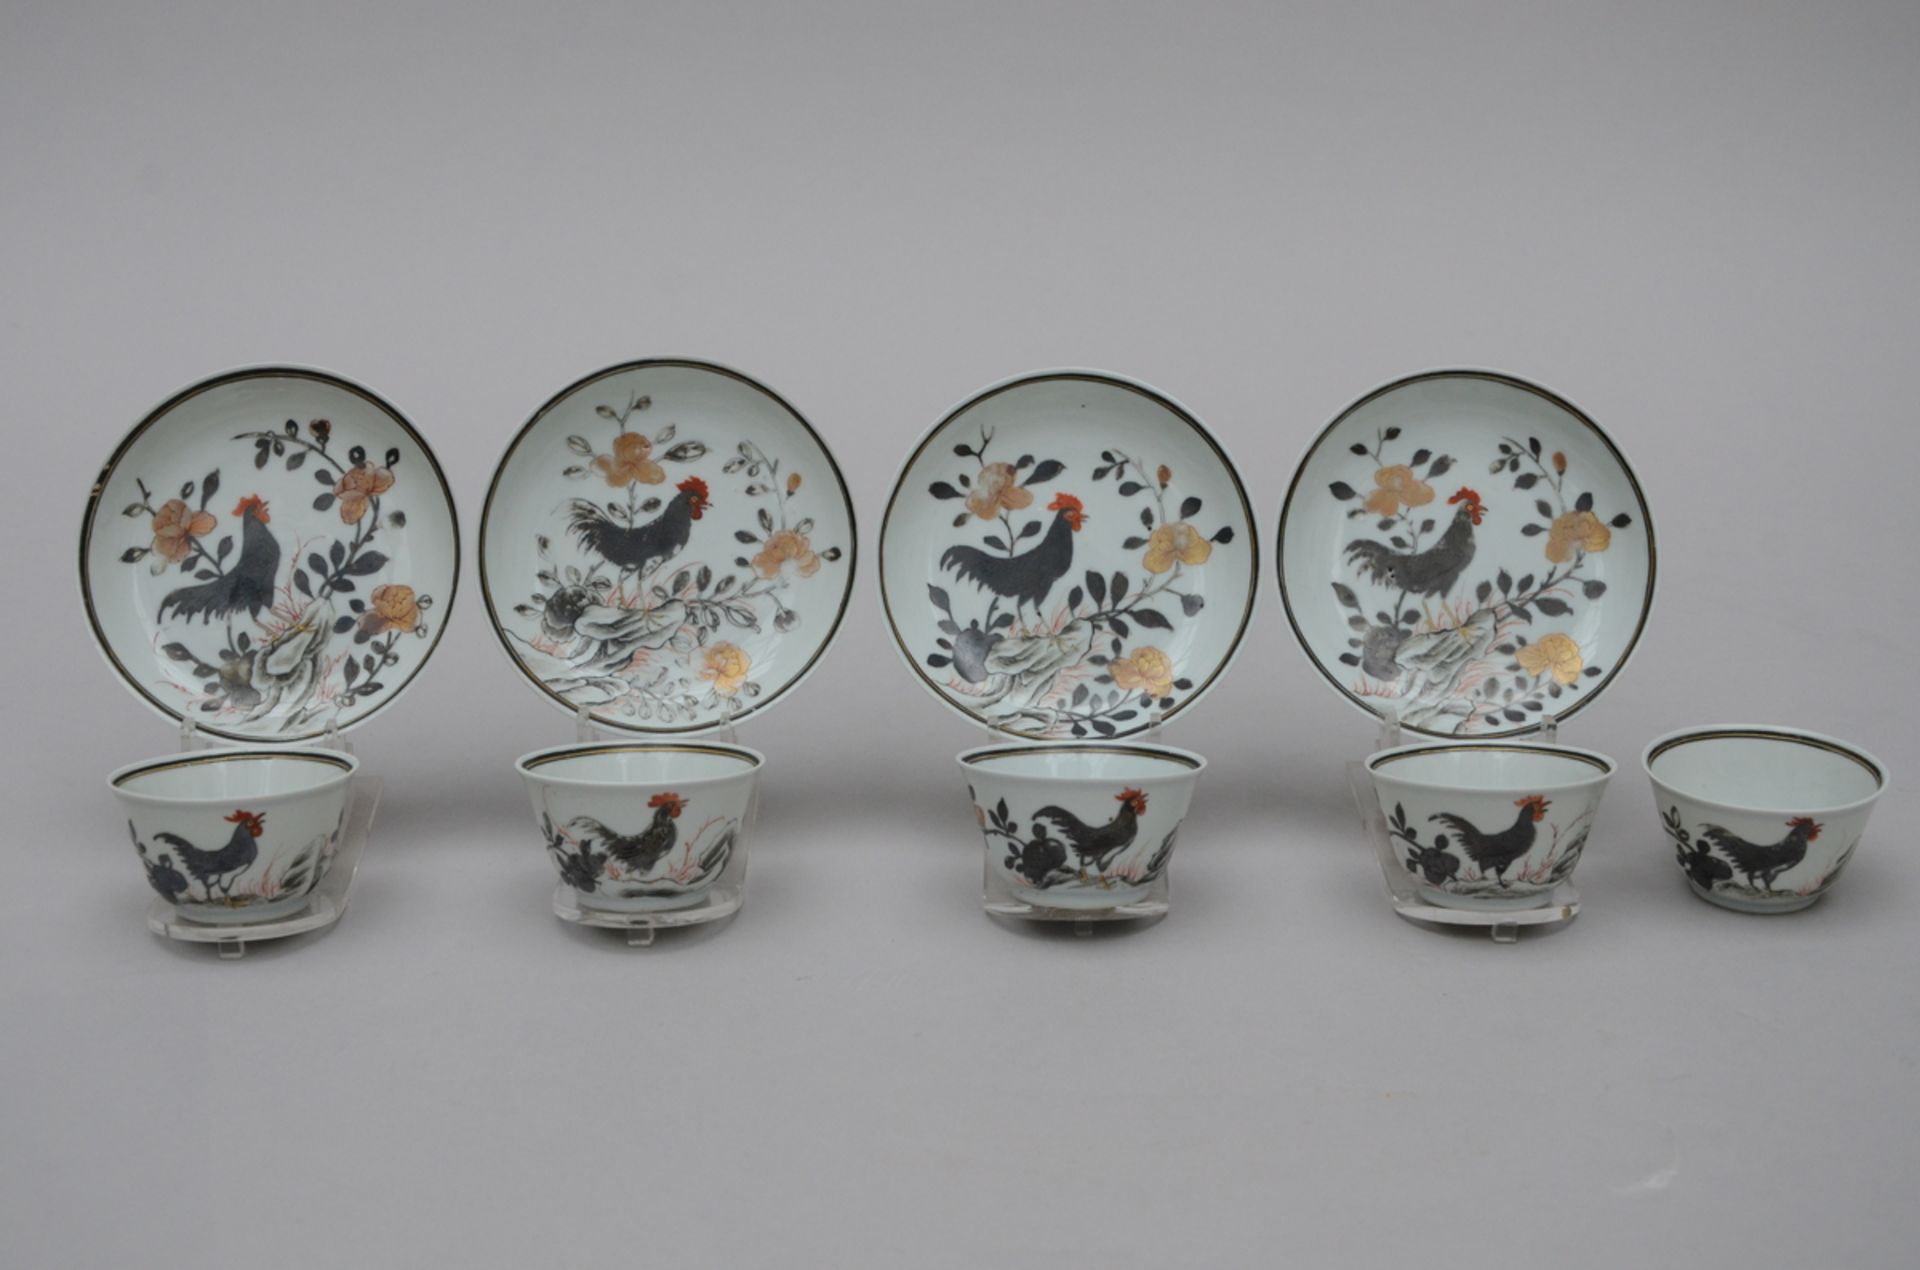 Lot: 5 cups in 4 dishes in Chinese porcelain 'rooster', 18th century (h4.7) (dia12cm) (*)